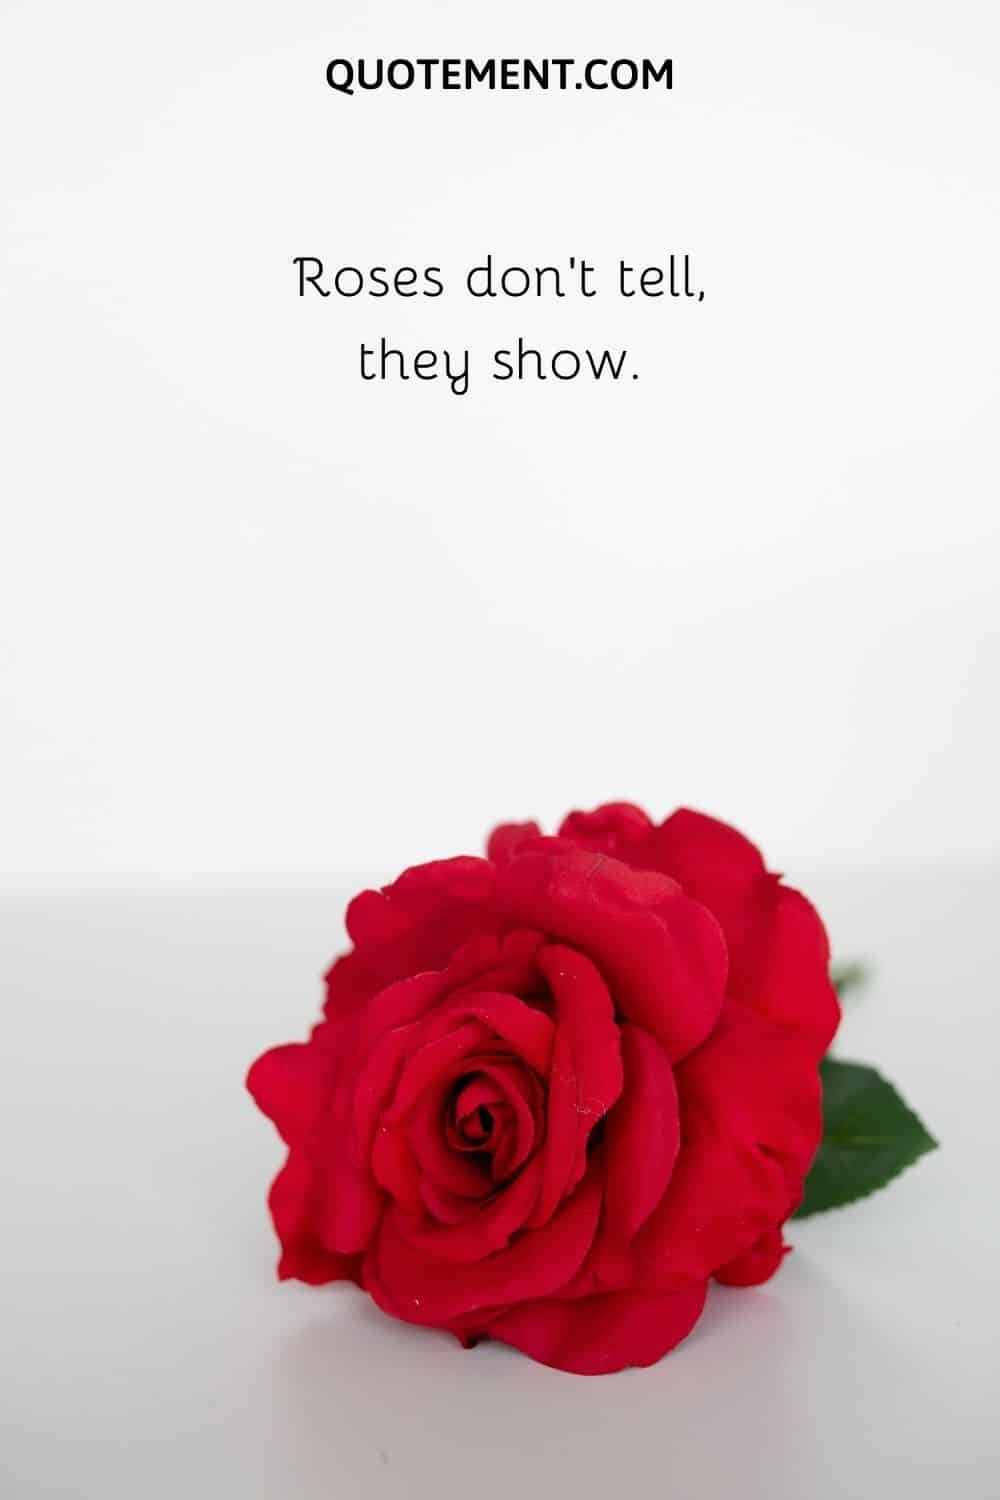 Roses don’t tell, they show.